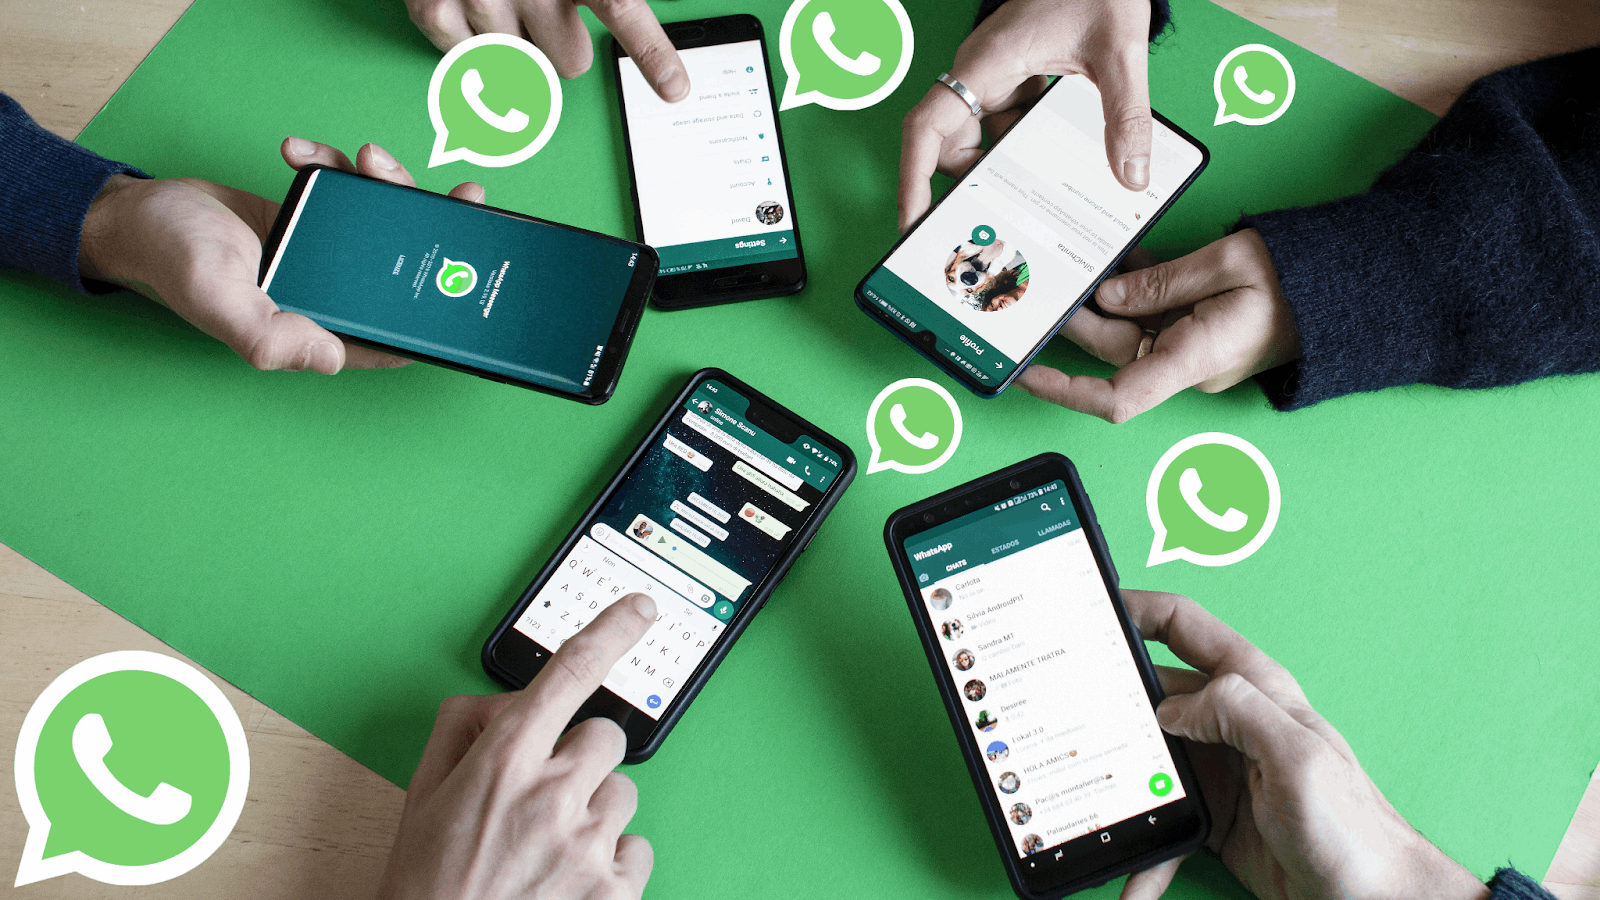 WhatsApp - How to Disable the Automatic Downloading of Photos and Videos